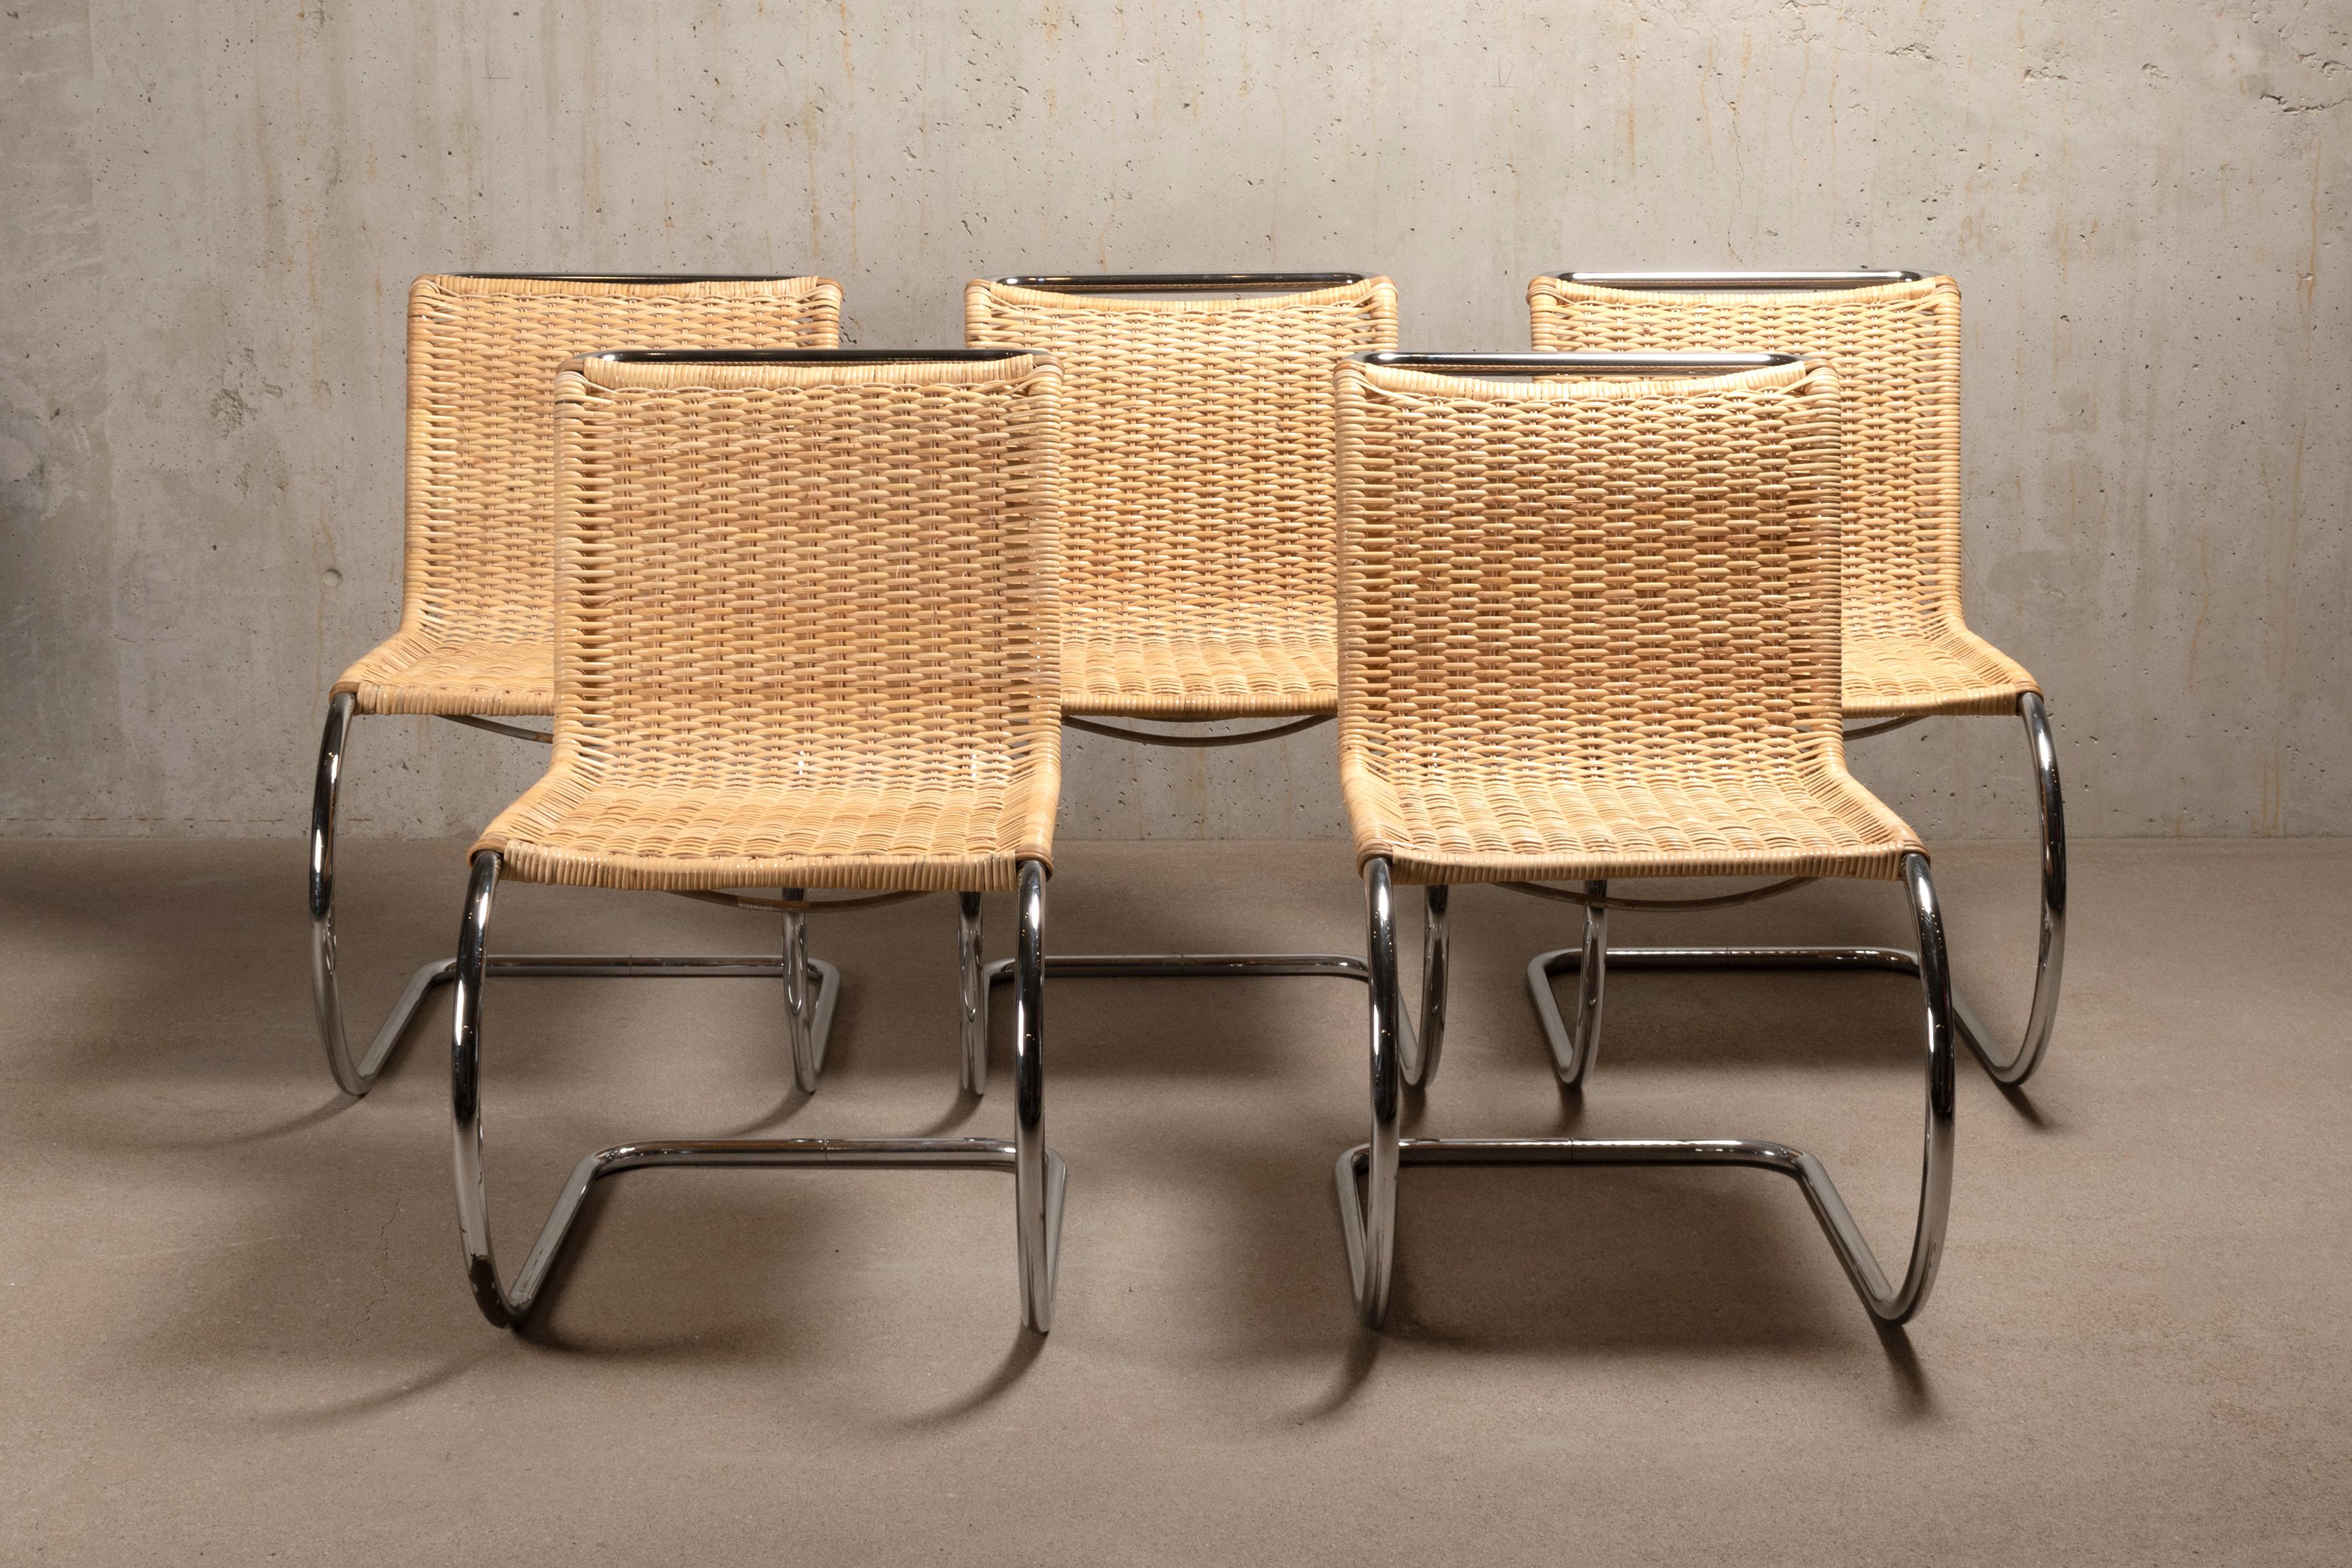 Stunning set MR10 Cantilever chairs designed by Mies van der Rohe. Chrome plated metal frames with wear mainly on undersides of the slides. New woven cane in excellent condition with no defects. Most chairs are signed with Thonet labels.